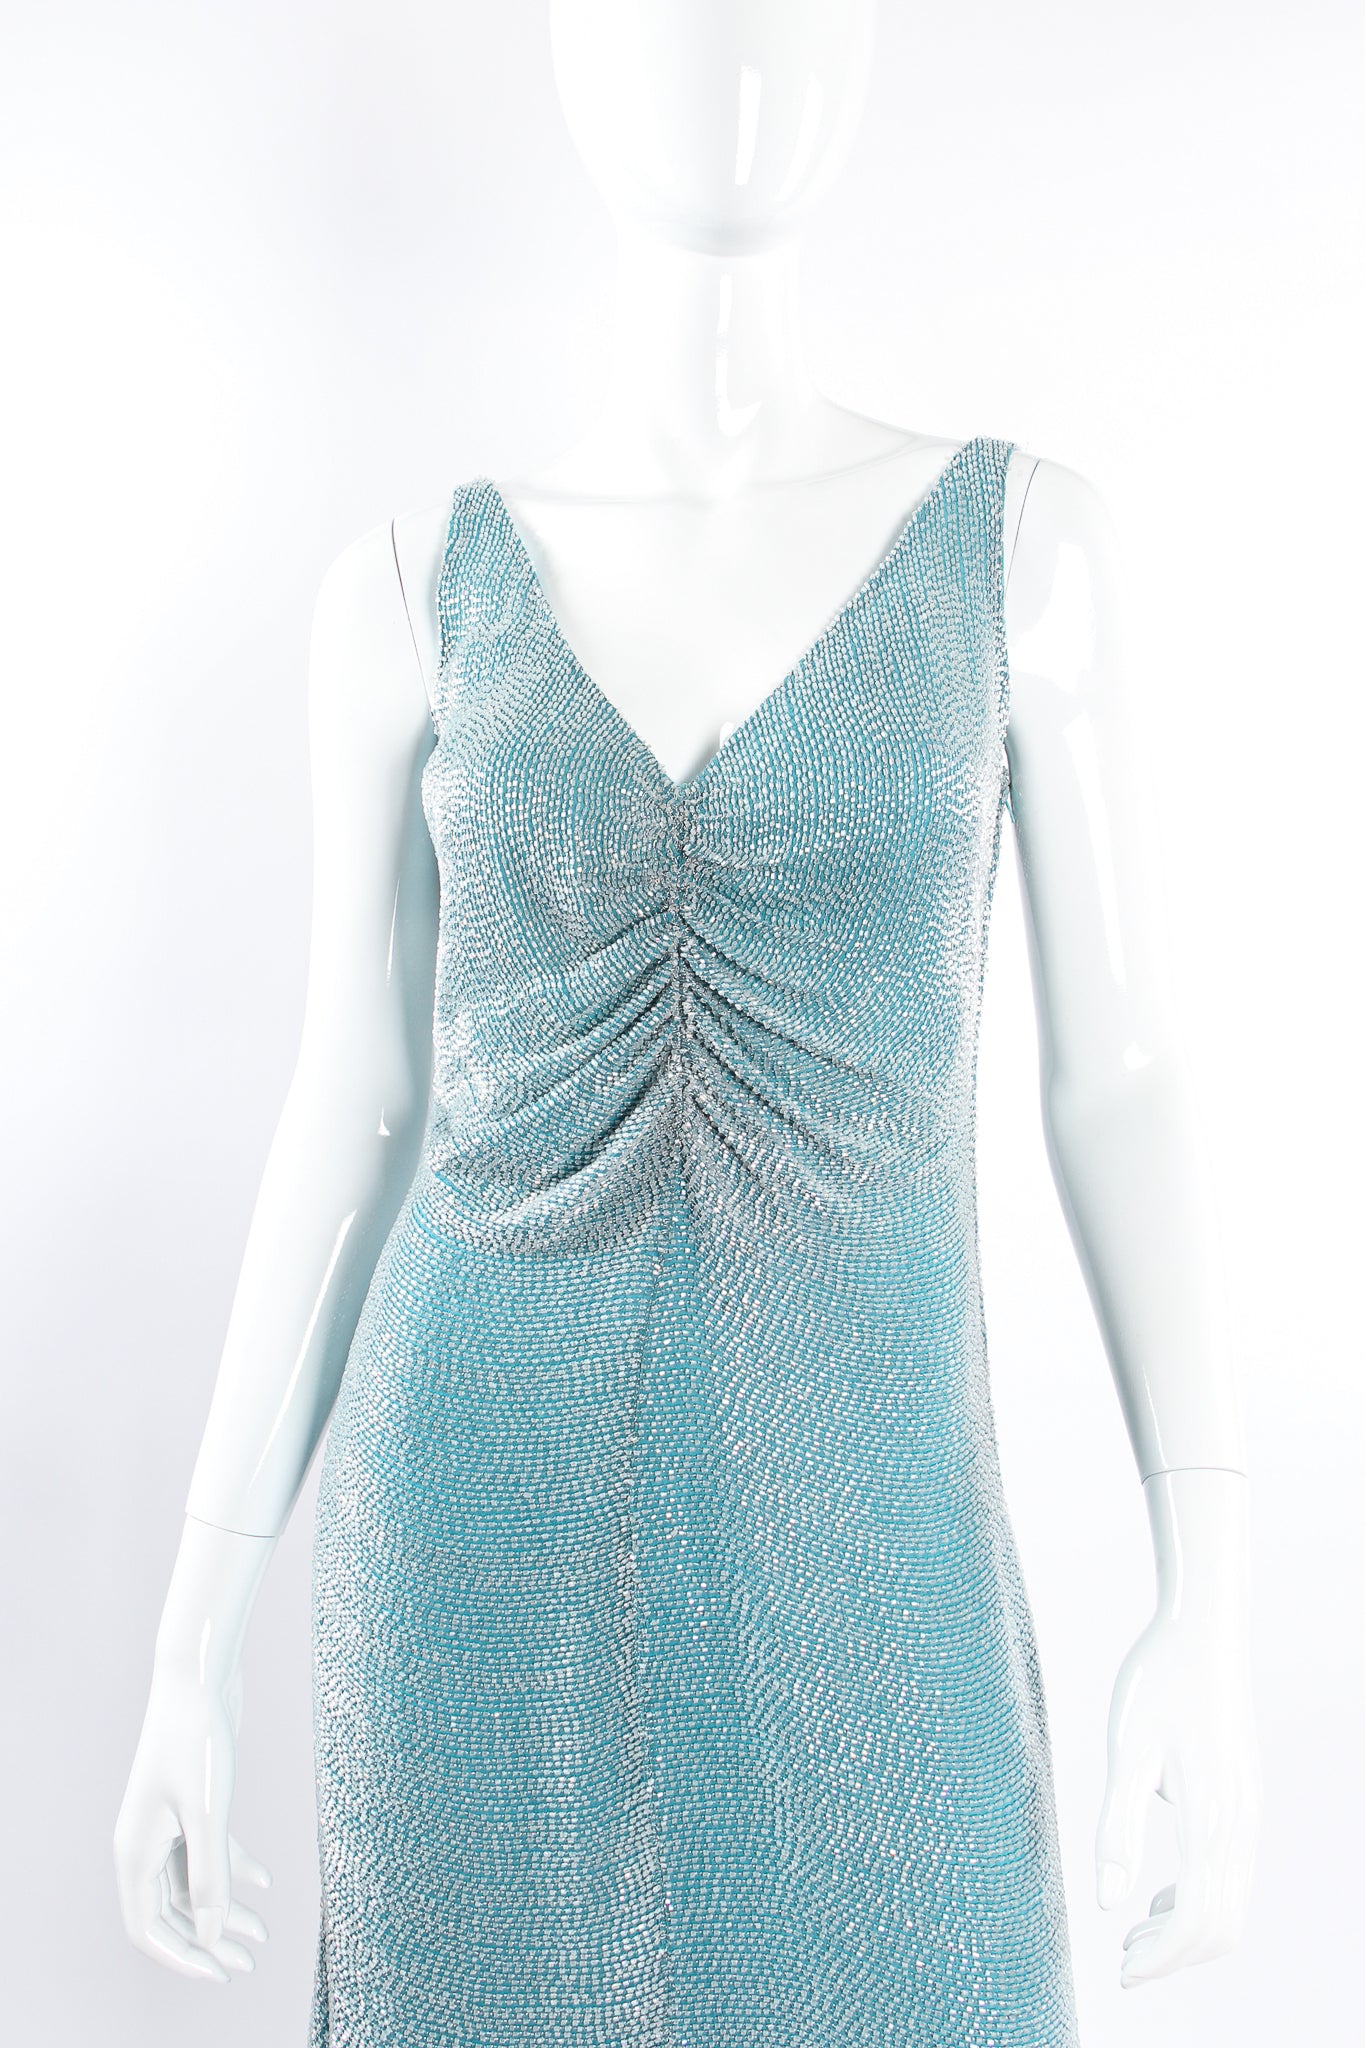 Vintage Badgley Mischka Beaded Ruched Bodice Dress on Mannequin bust at Recess Los Angeles